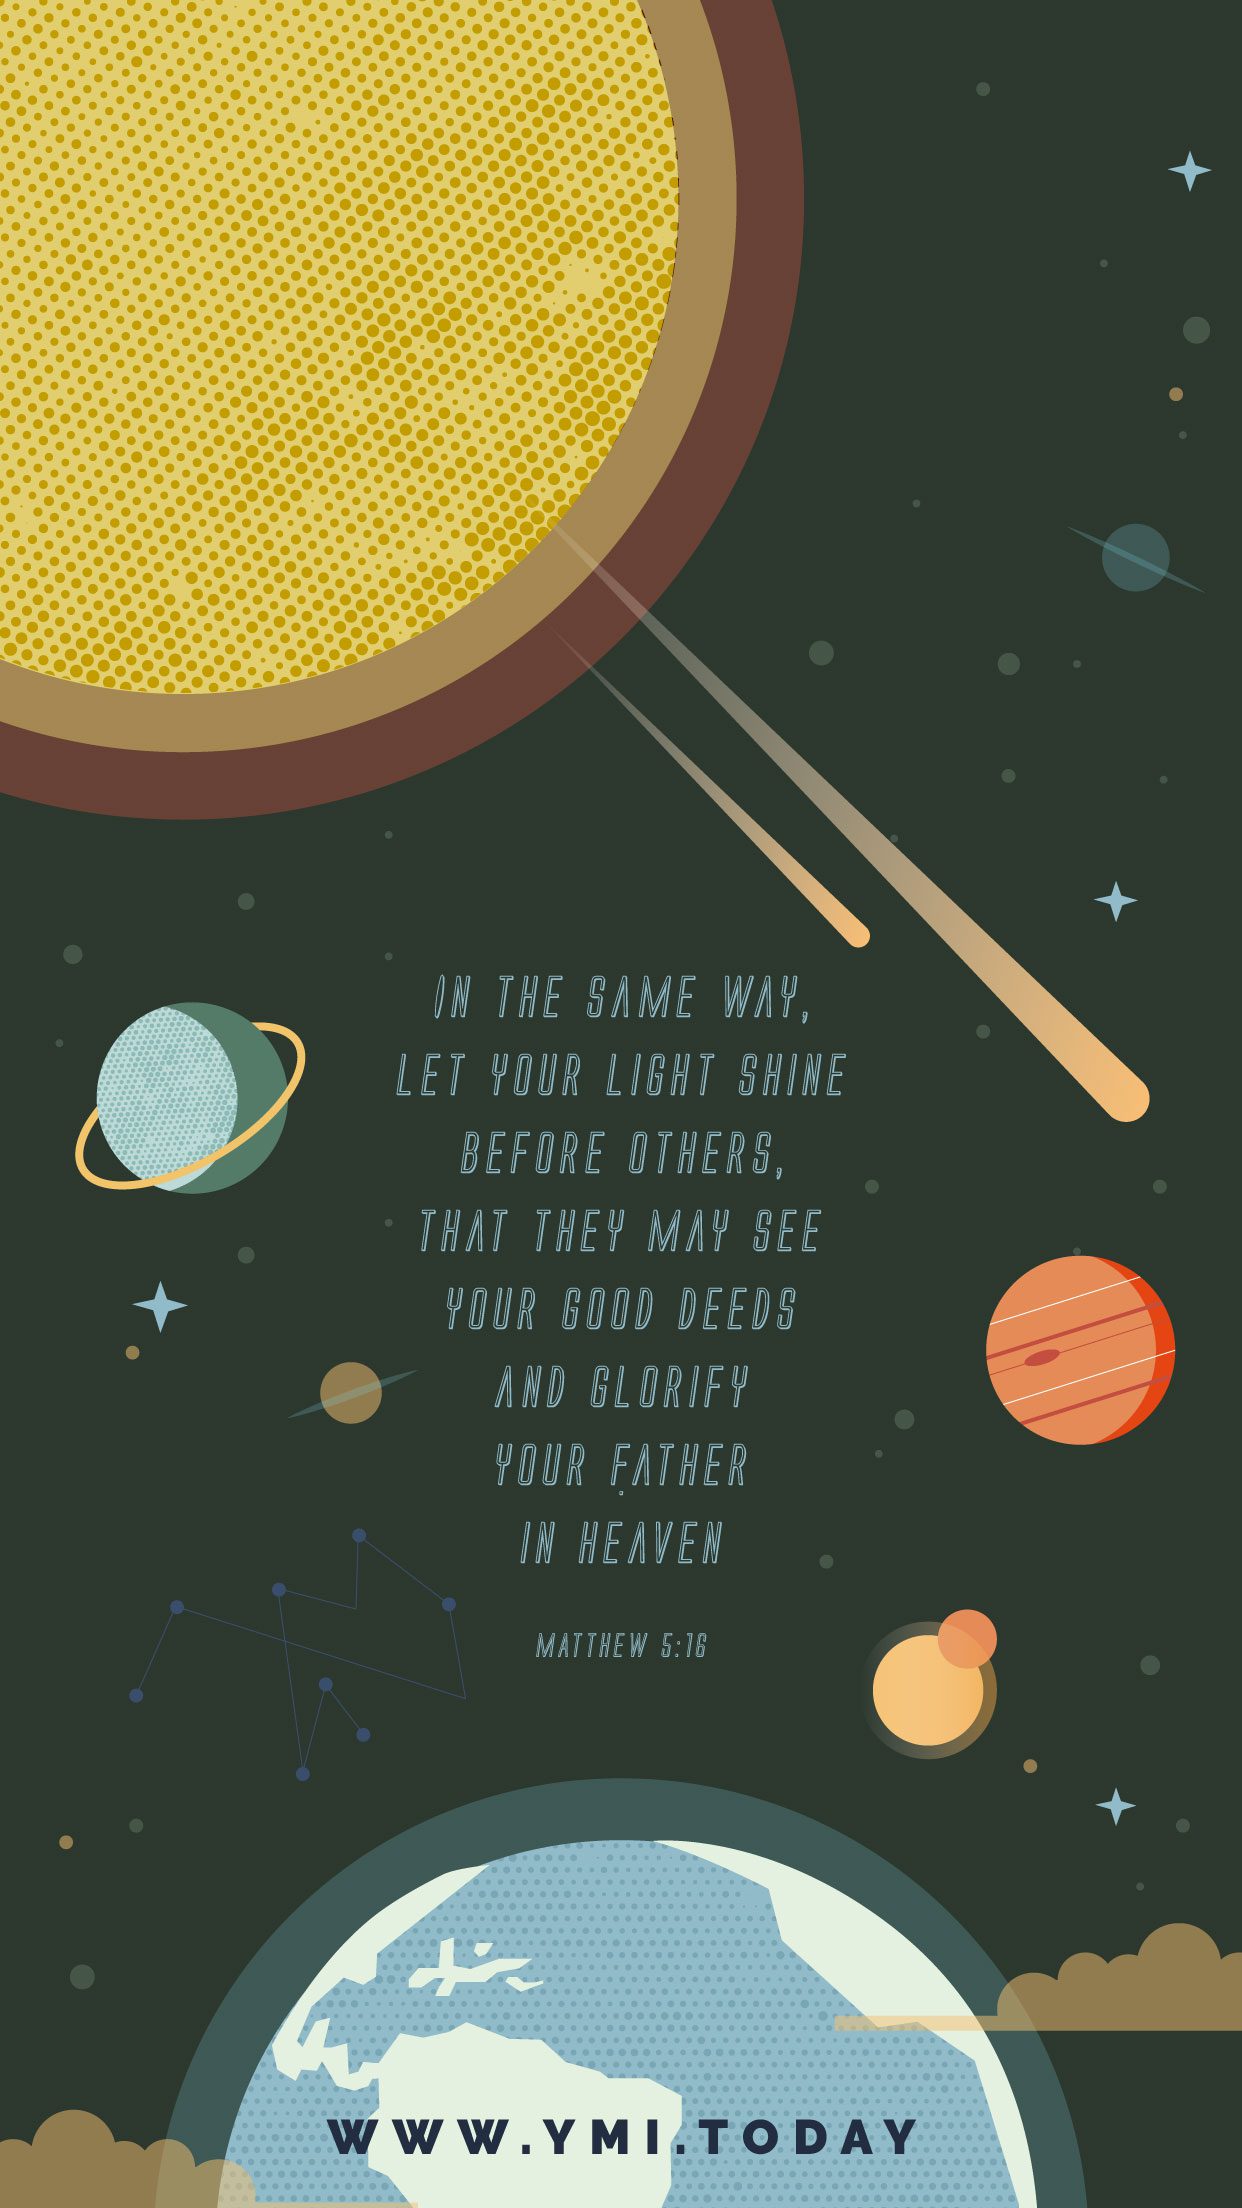 YMI August 2018 Phone Lockscreen - In the same way, let your light shine before others, that they may see your good deeds and glorify your Father in heaven. - Matthew 5:16